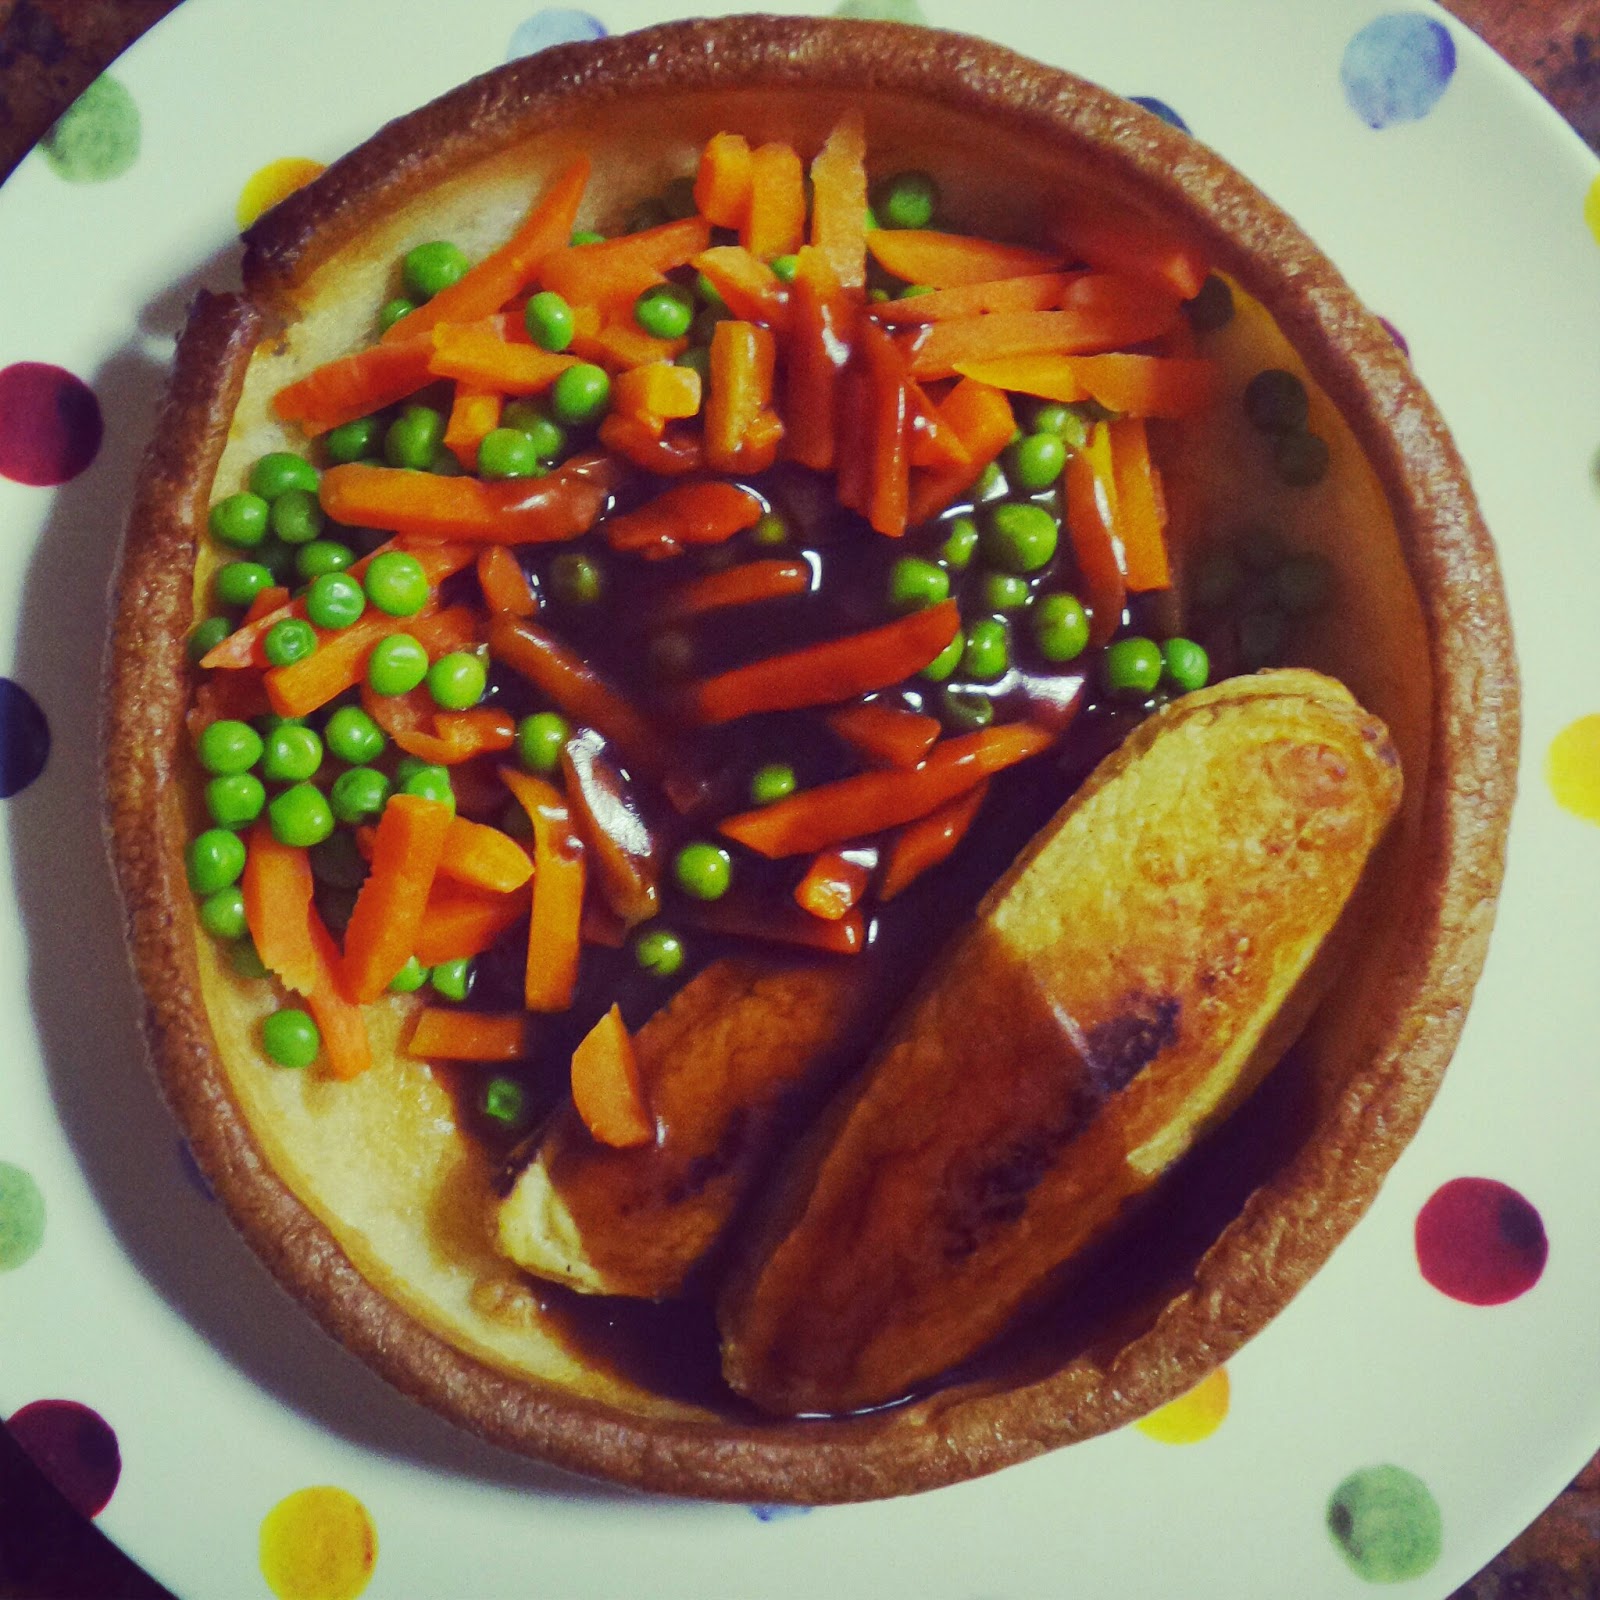 Quorn Chicken, Vegetables and Yorkshire Pudding